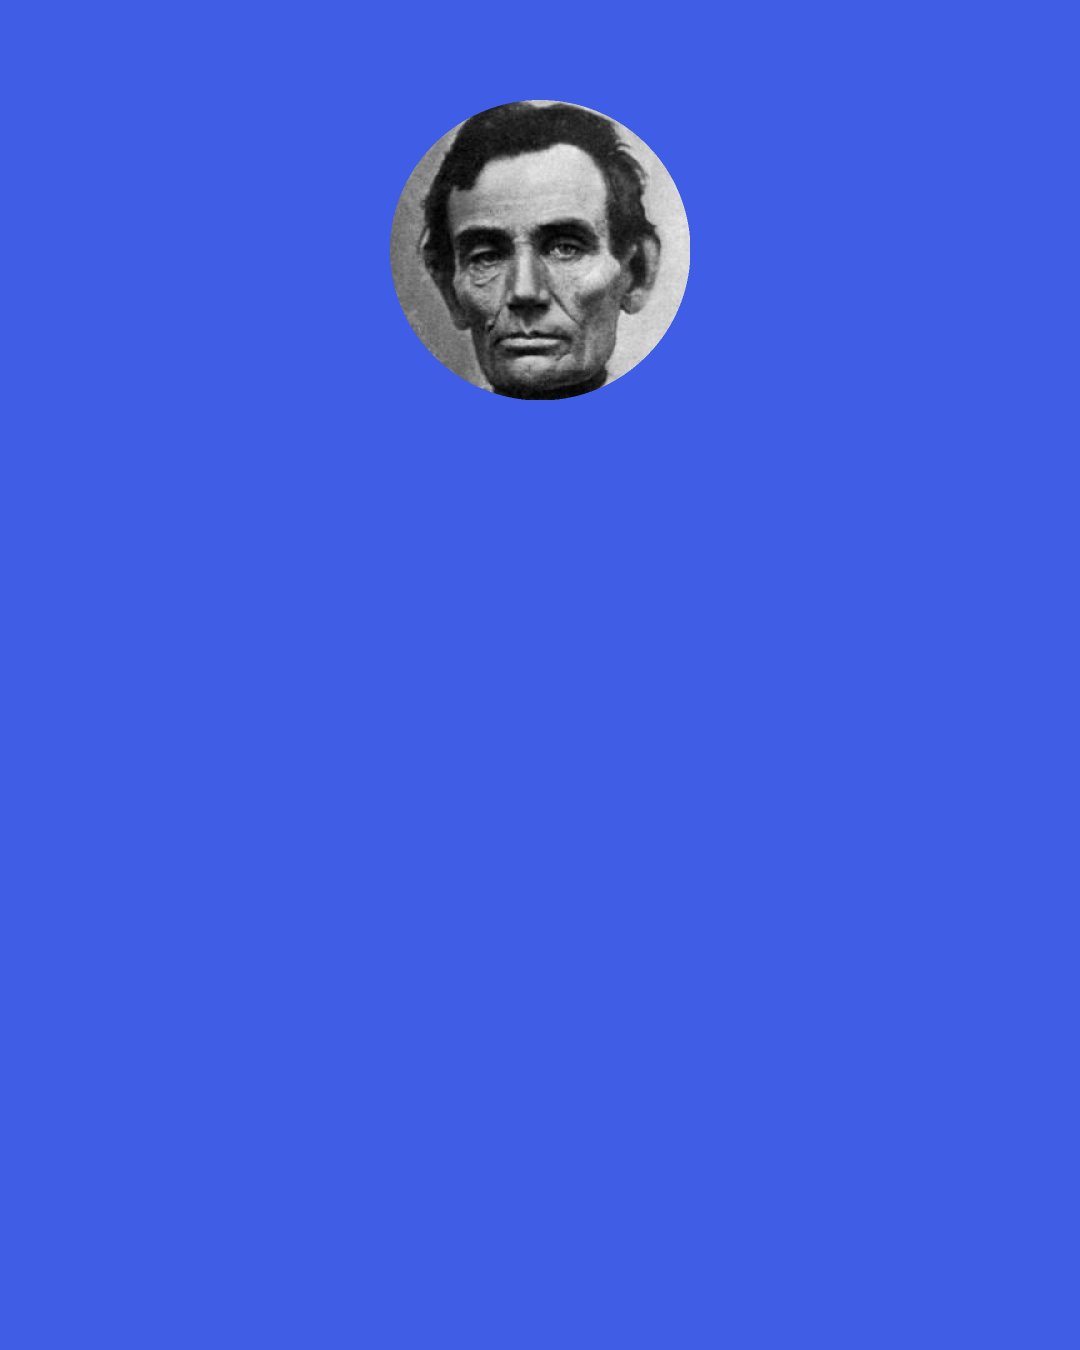 Abraham Lincoln: I told myself, "Lincoln, you can never make a lawyer if you do not understand what demonstrate means." So I left my situation in Springfield, went home to my father's house, and stayed there till I could give any proposition in the six books of Euclid at sight. I then found out what "demonstrate" means, and went back to my law studies.